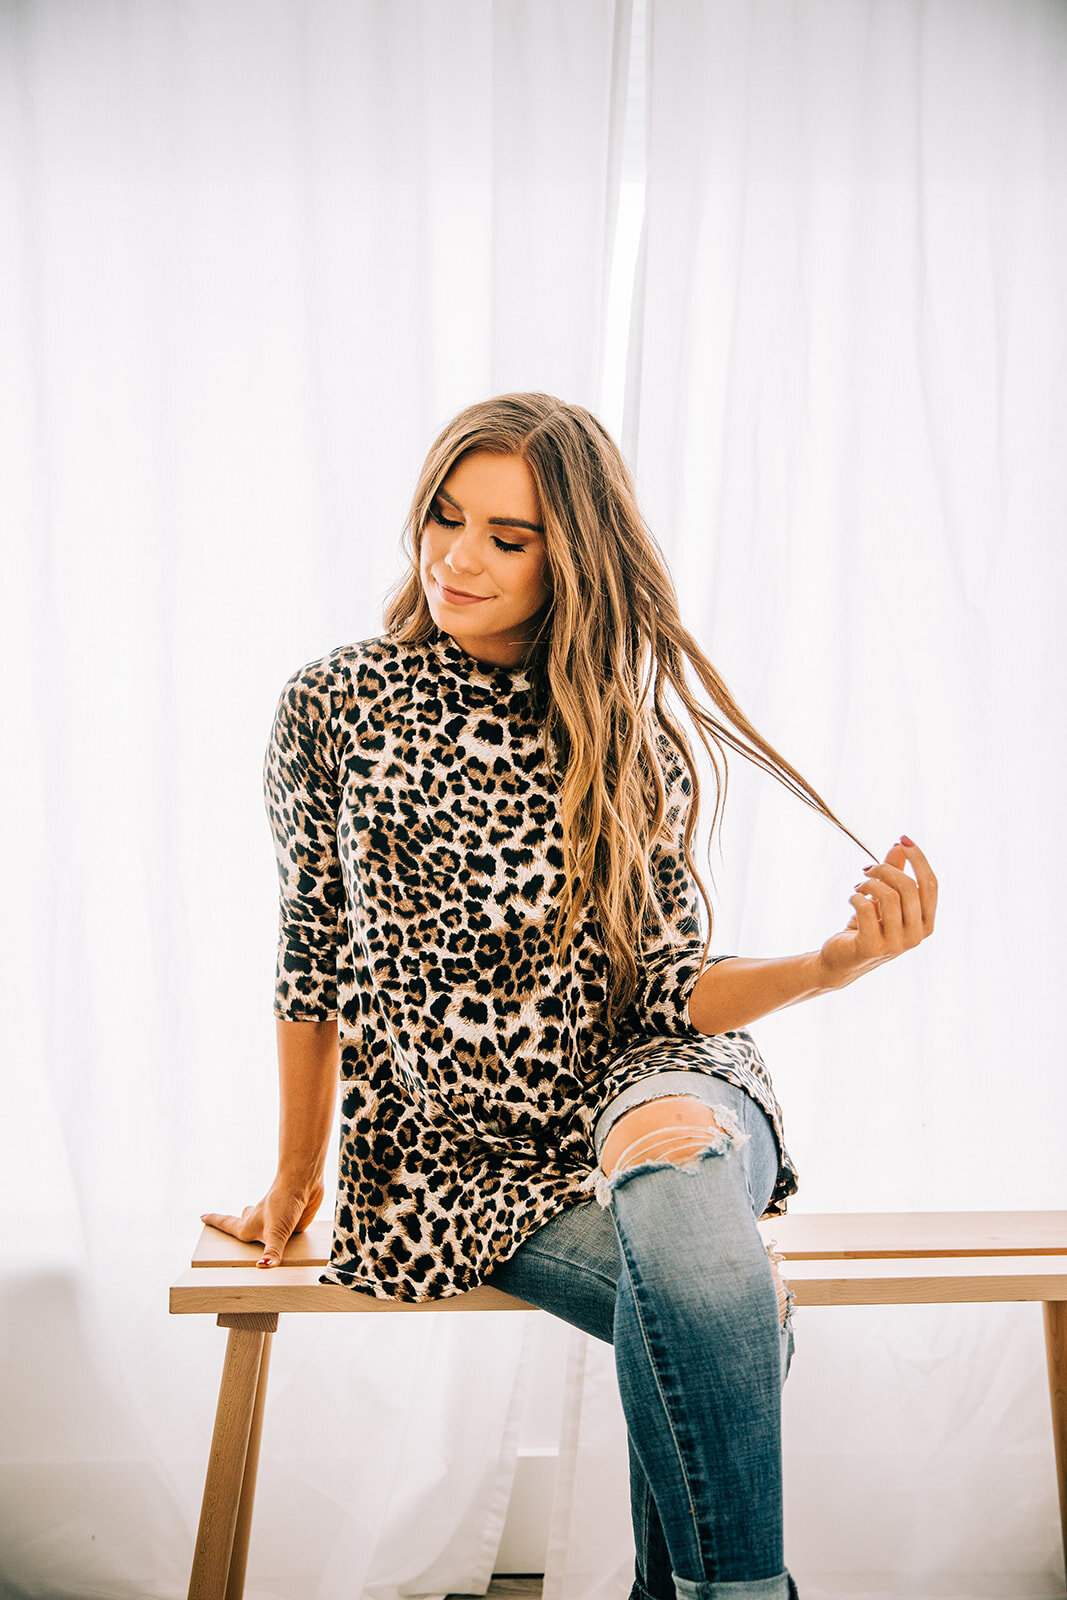  cheetah print peplum top online clothing boutique commercial photography station studio logan utah model with long beachy waves holding strands of hair crossing legs distressed jeans looking down sitting on a bench commercial clothing boutique #onli